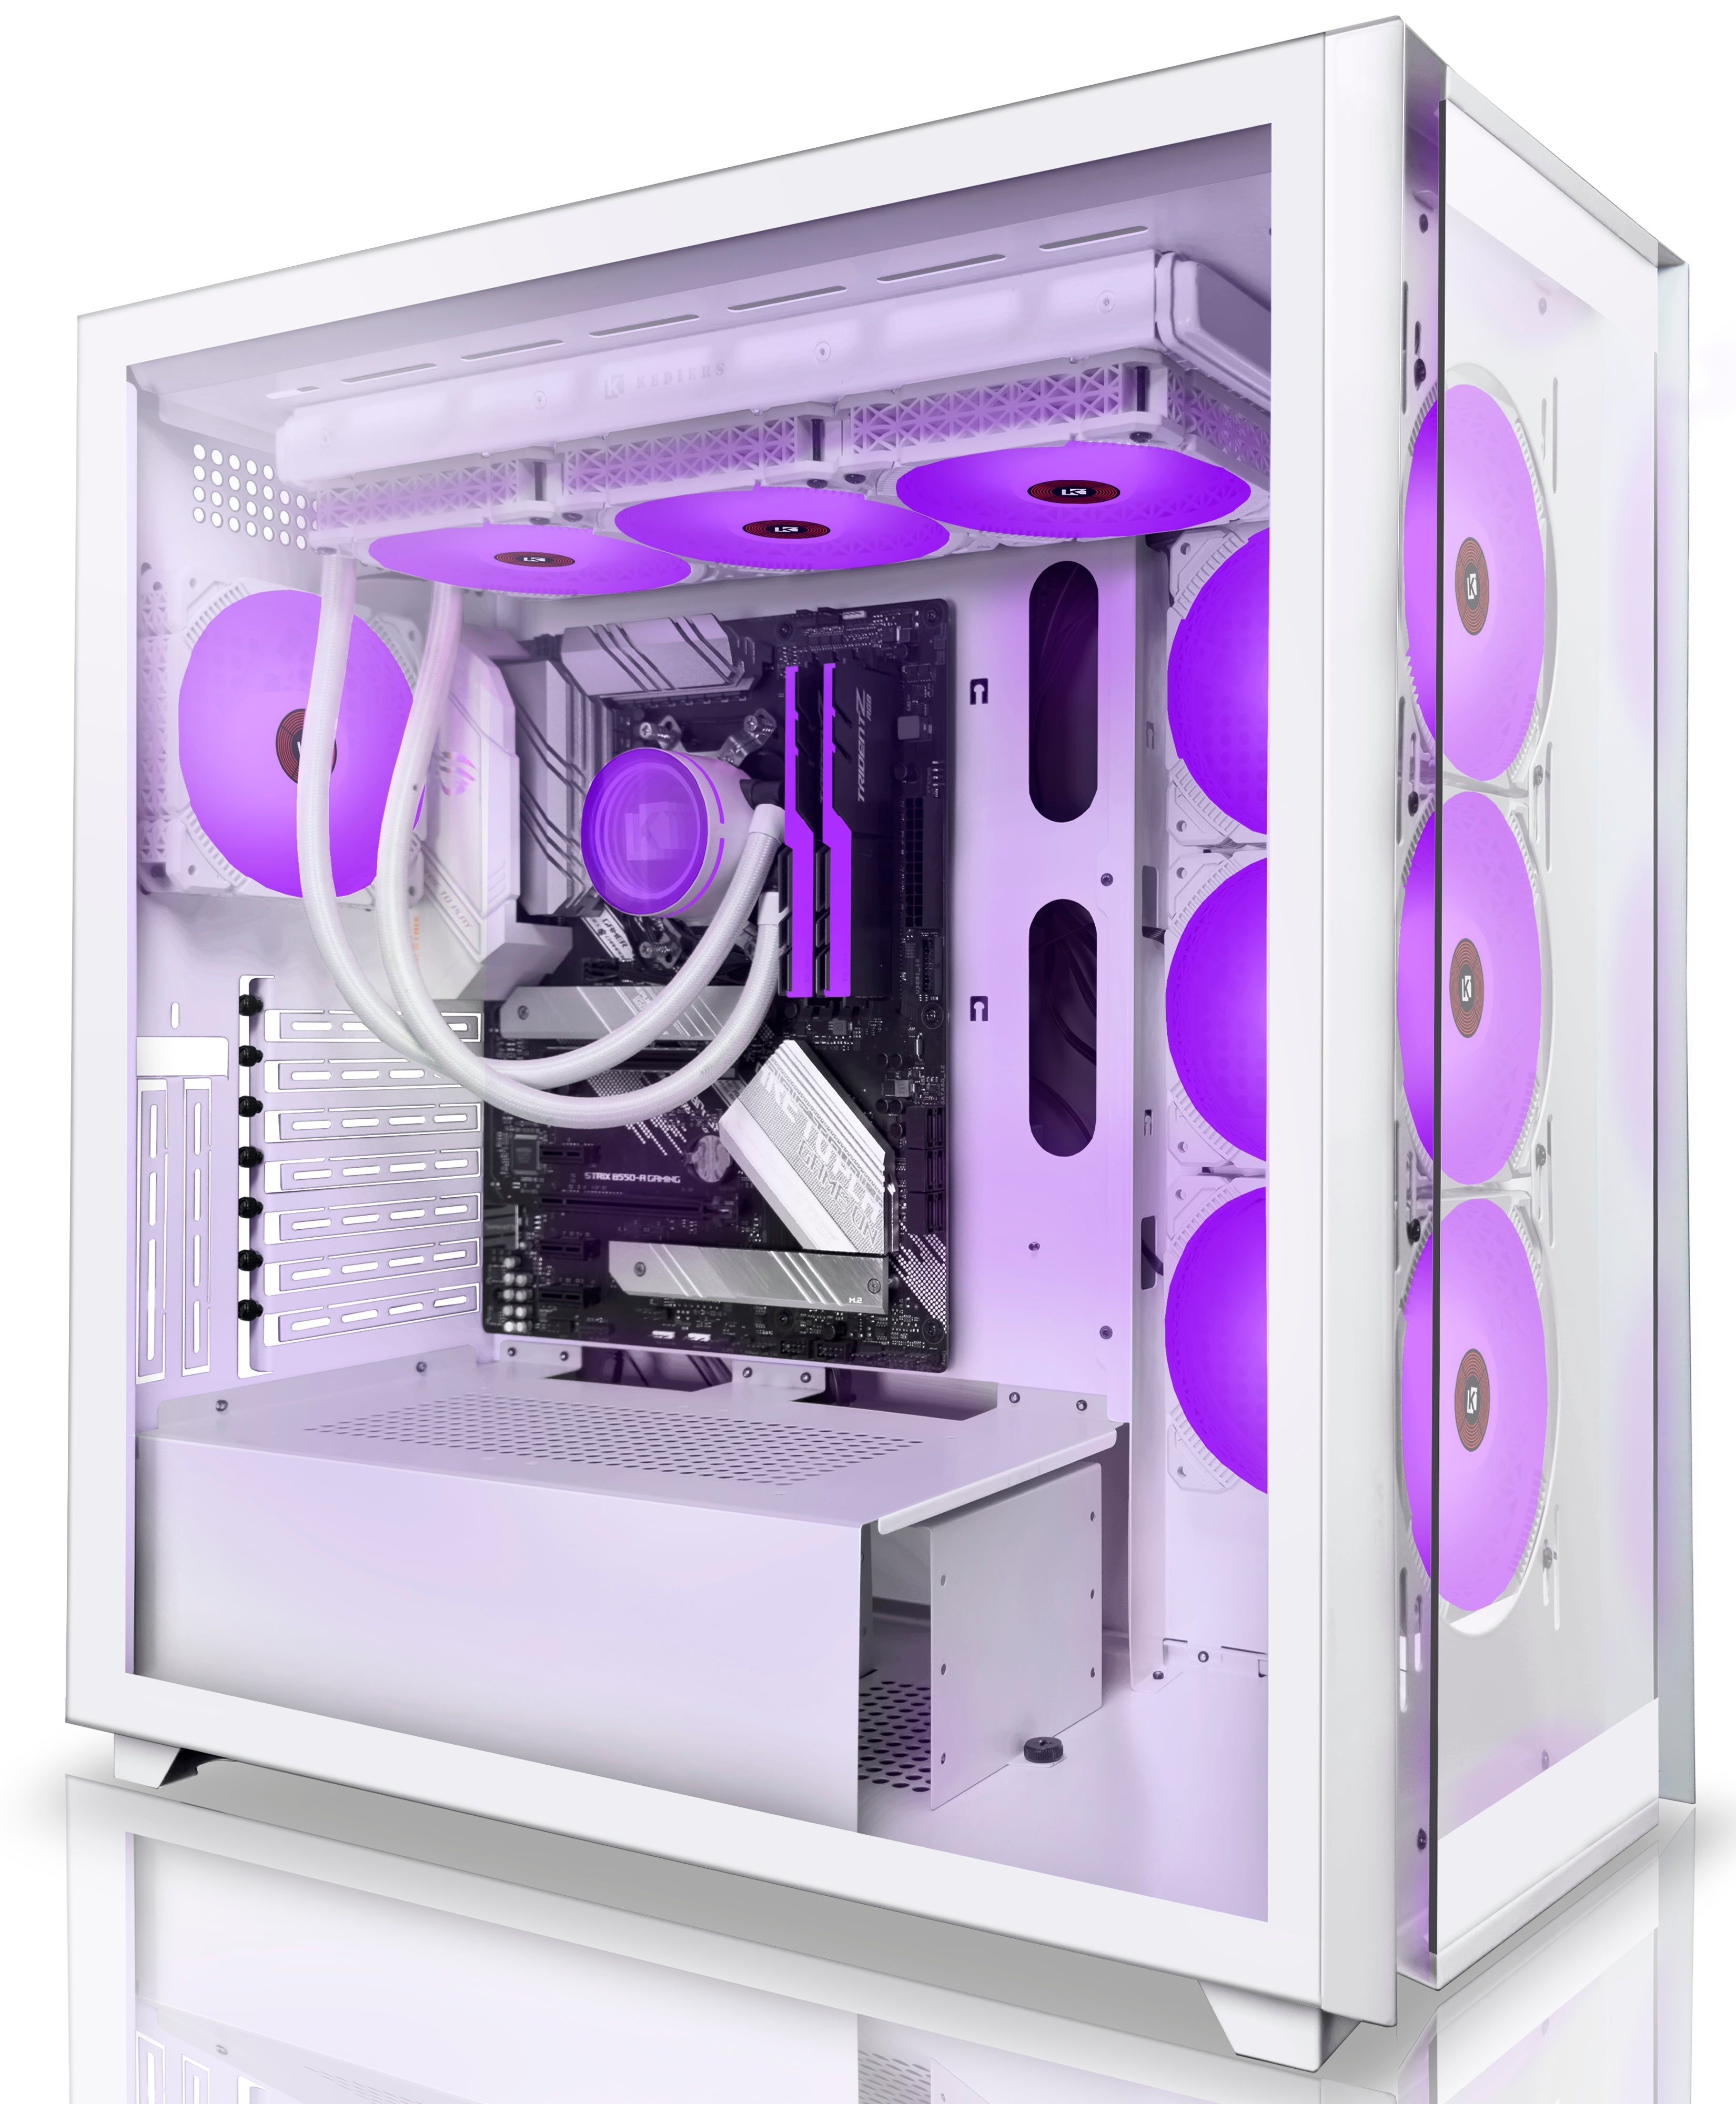 KEDIERS PC Case - C700 E-ATX Tower 3*Tempered Glass Gaming Computer Case with 10 ARGB Fans